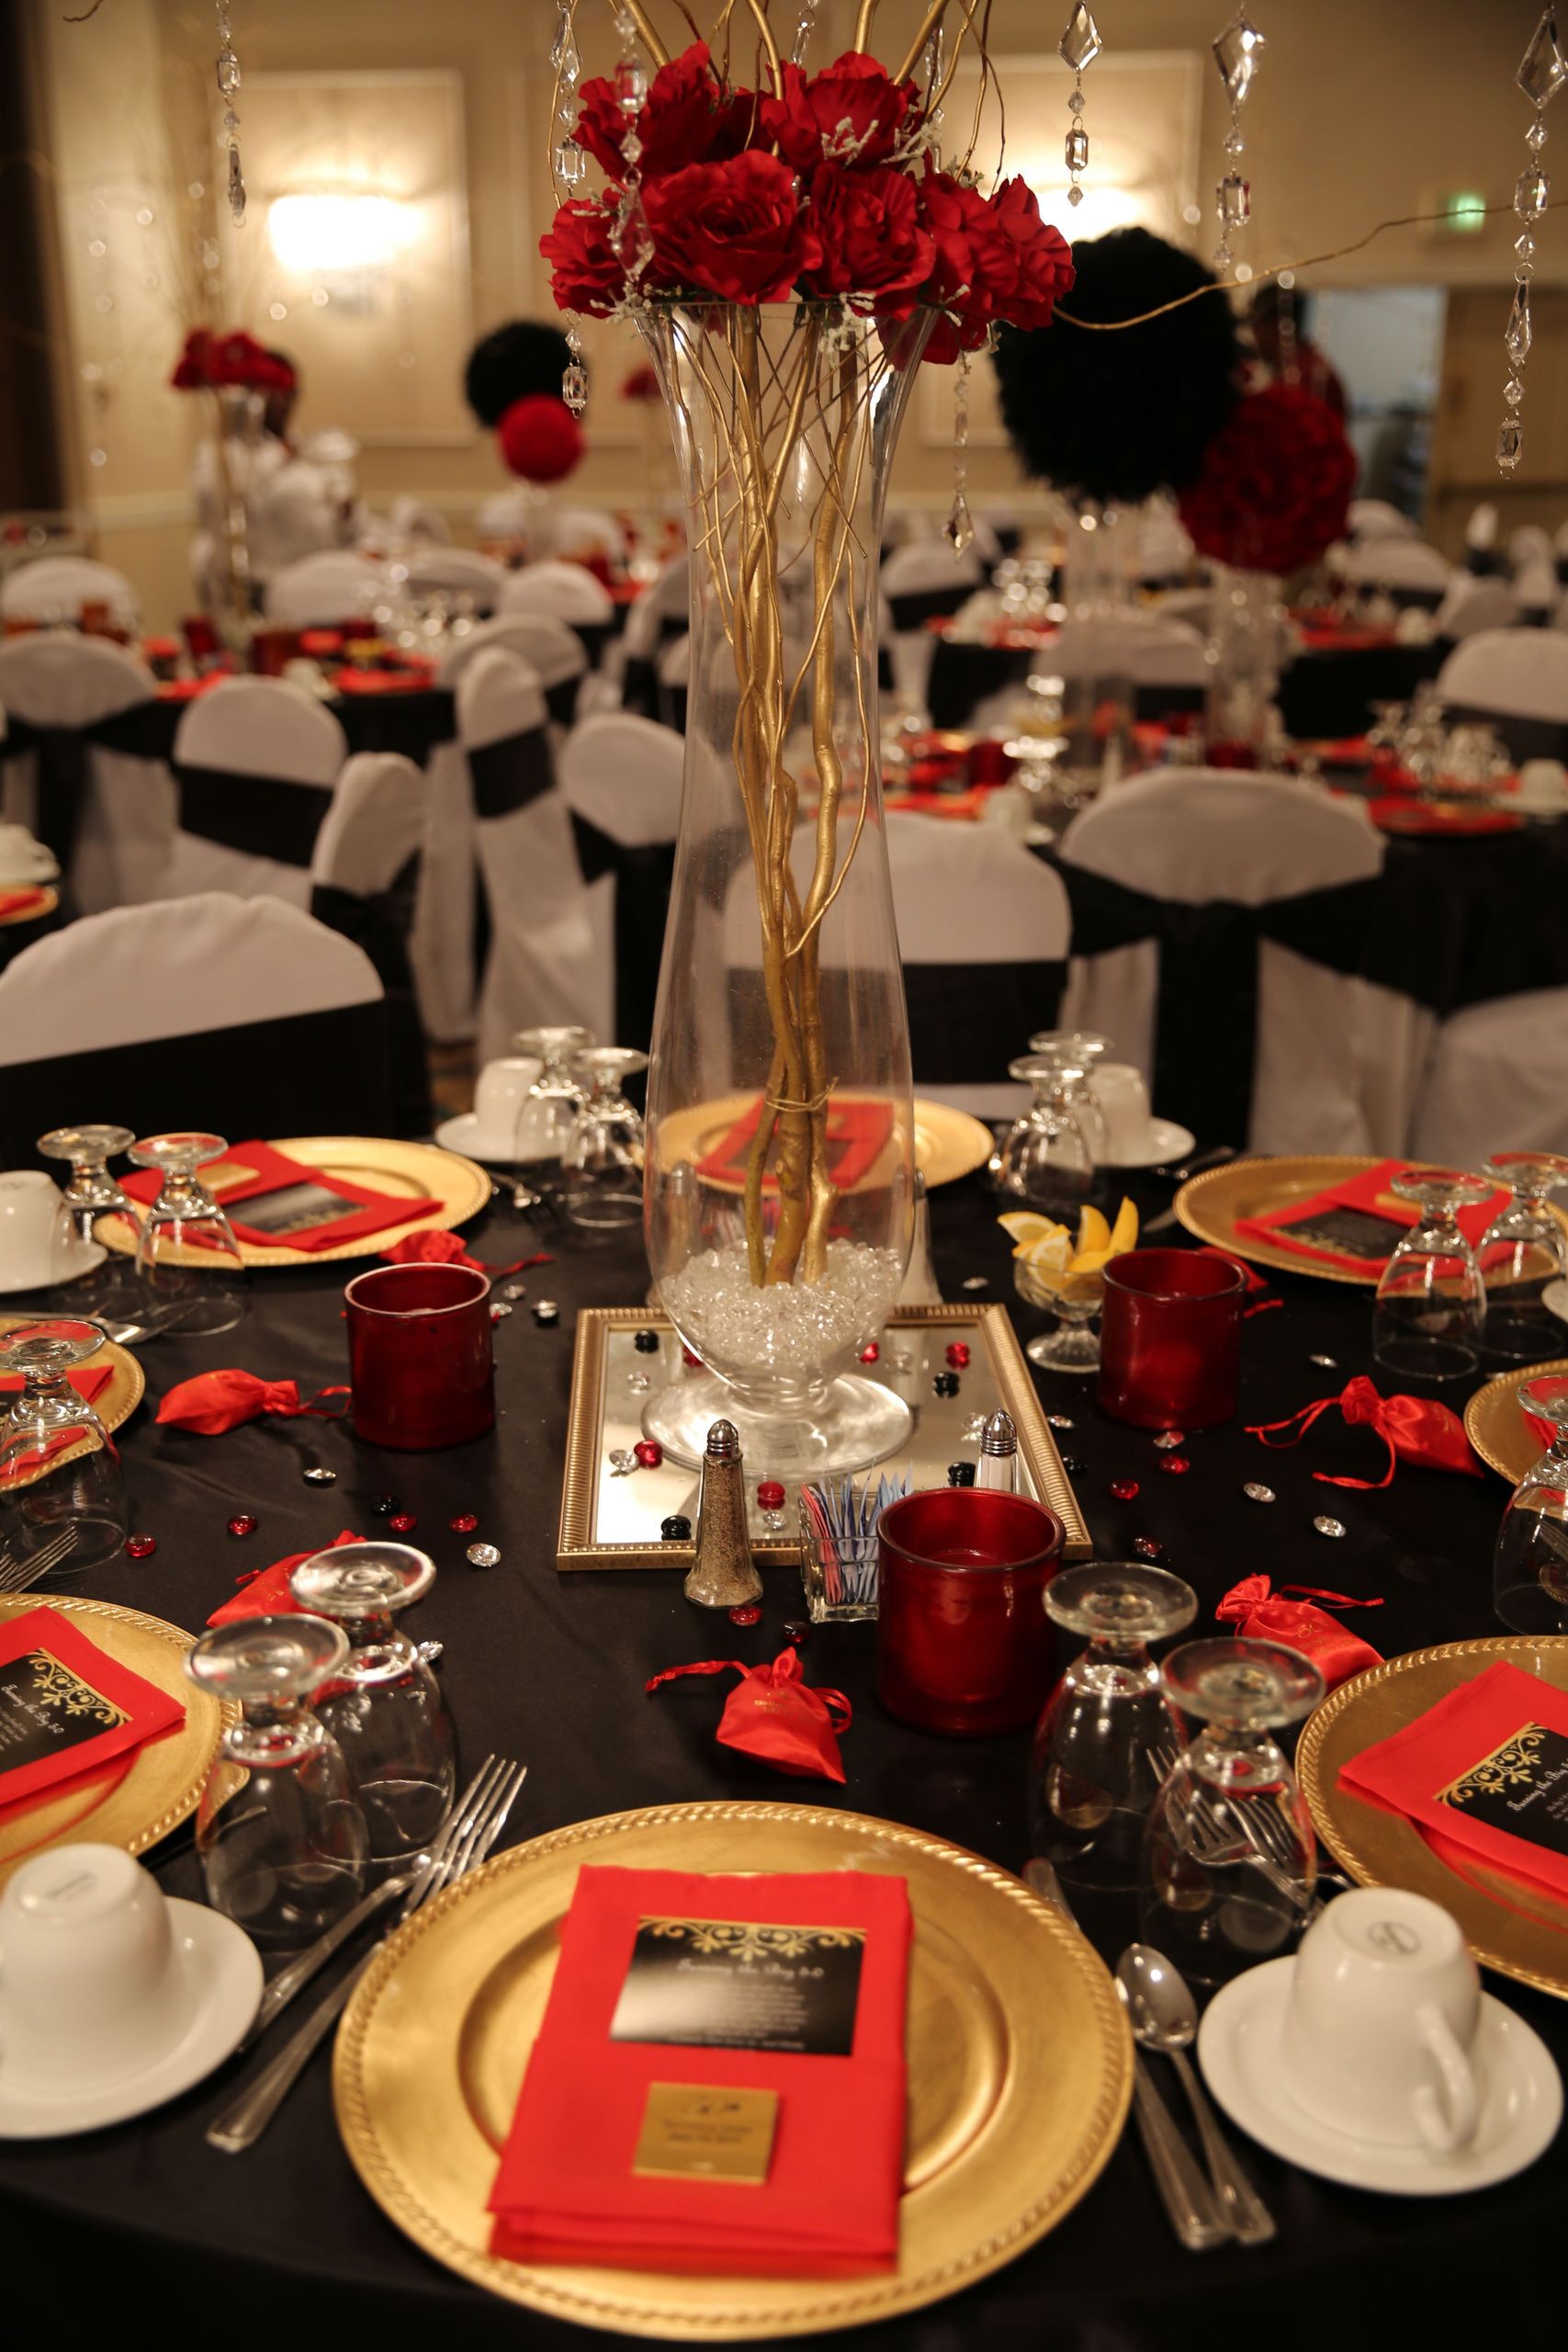 Decorations For 50th Birthday Party
 Red black and gold table decorations for 50th birthday